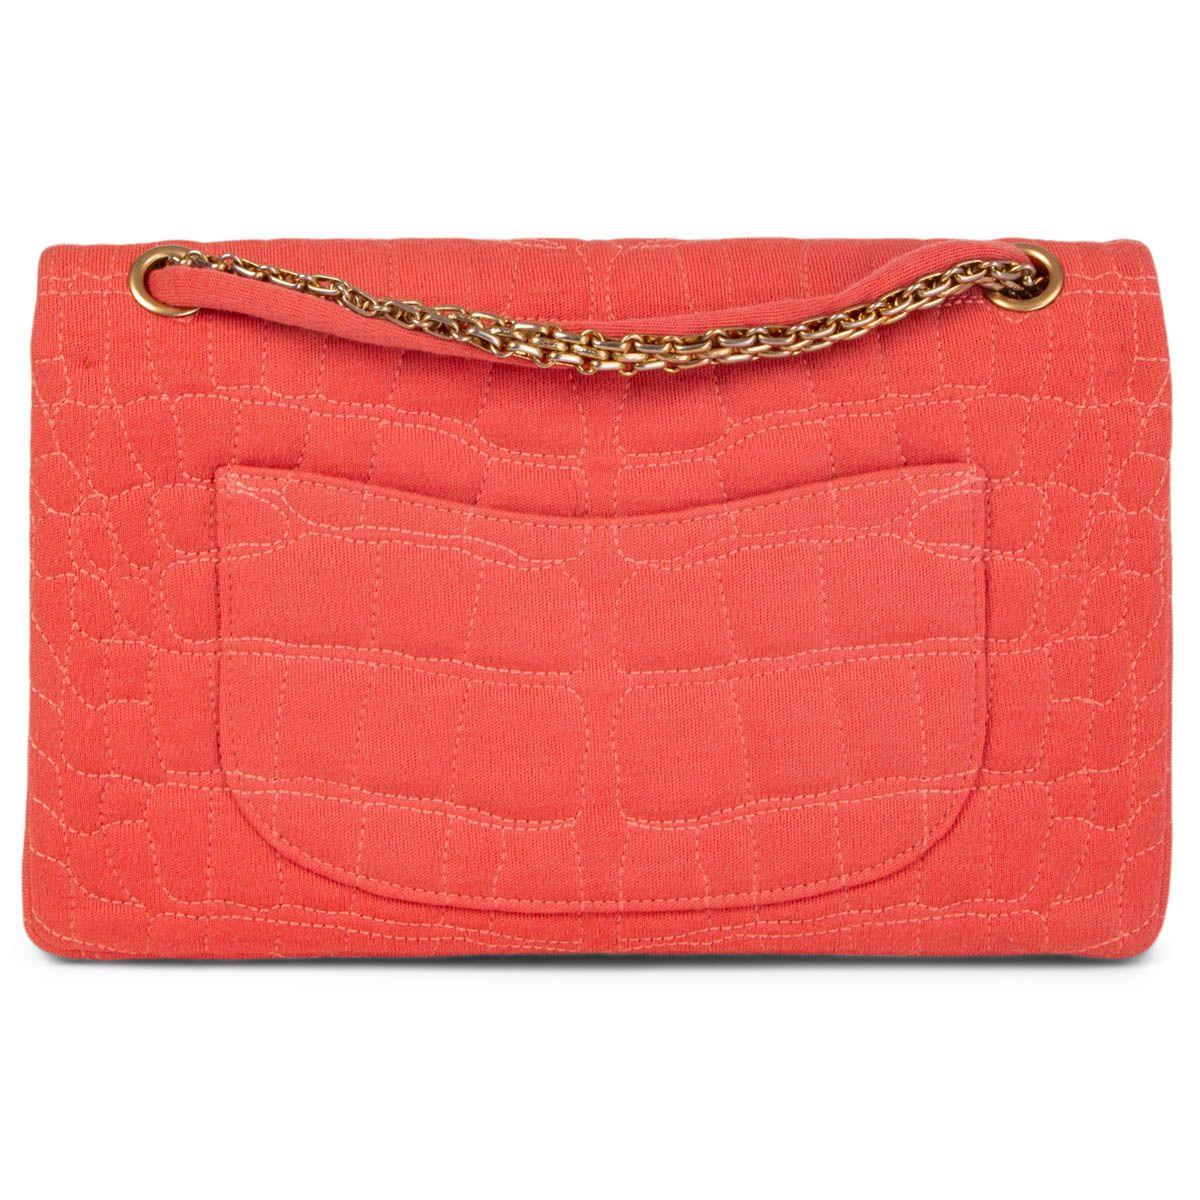 Red CHANEL coral JERSEY COCO'S CROC 2.55 REISSUE 226 DOUBLE FLAP Shoulder Bag